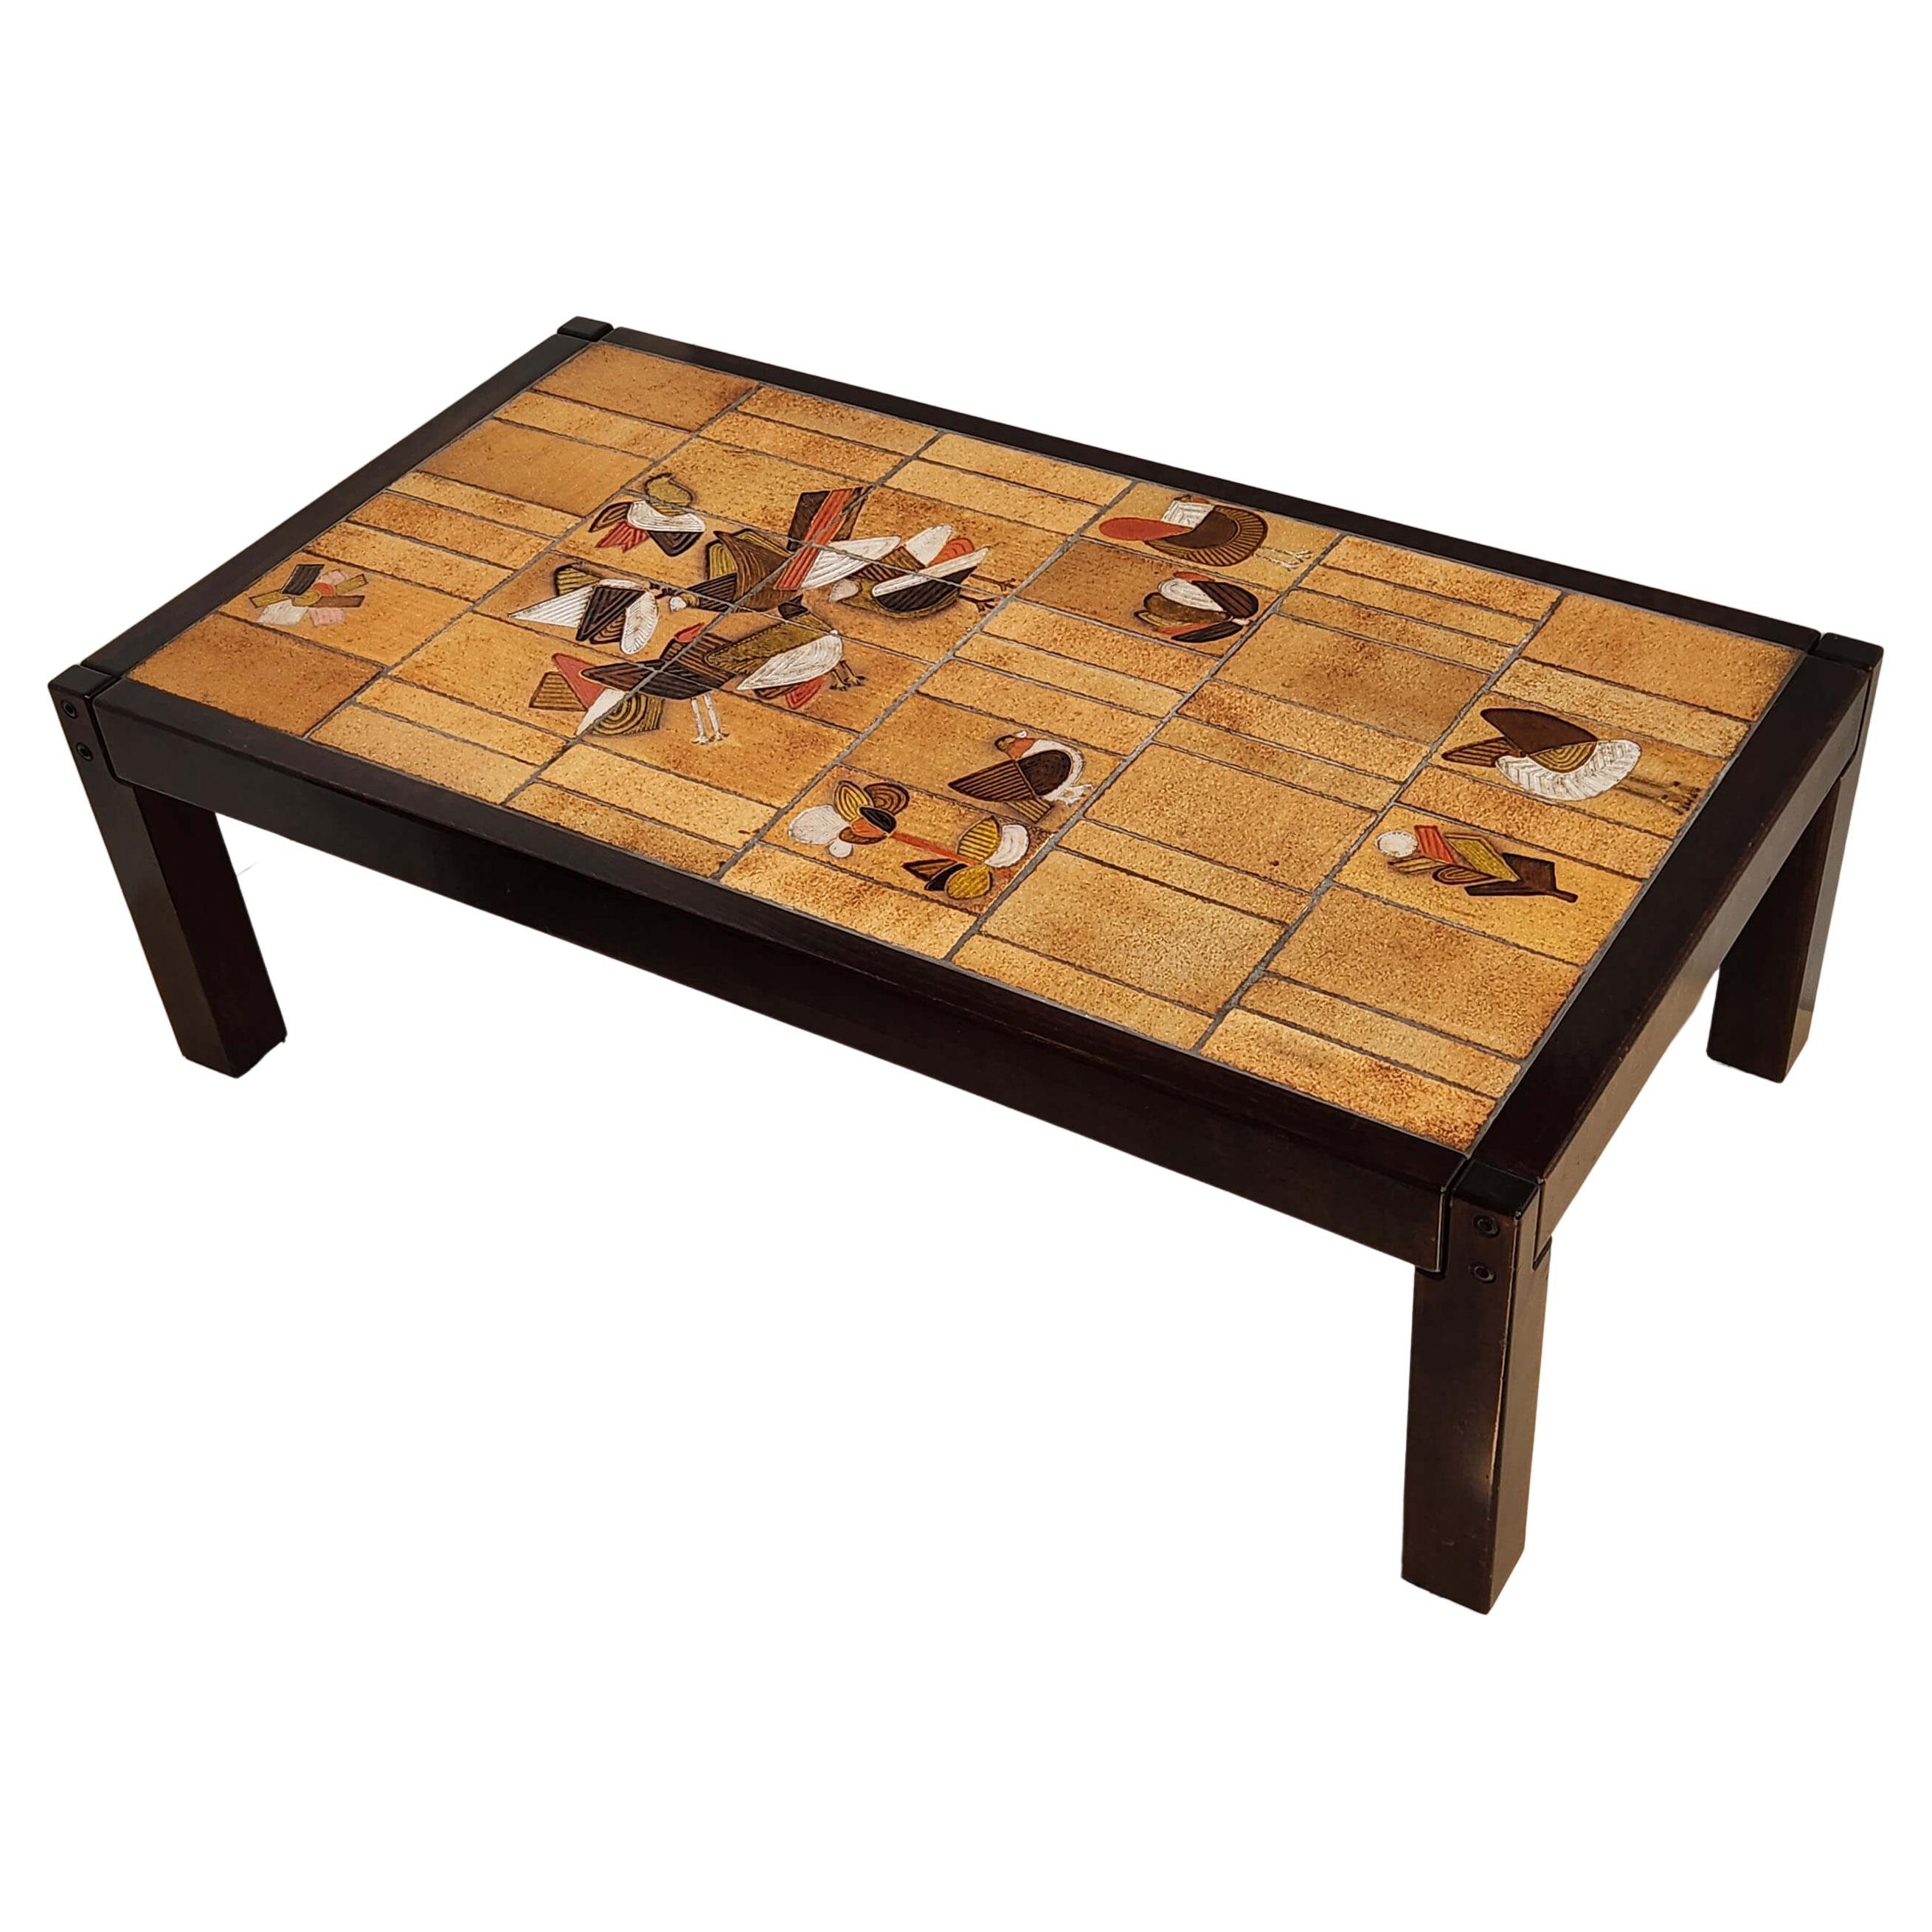 Roger Capron - Vintage Ceramic Coffee Table with Birds Imprints on a Wood Frame  For Sale